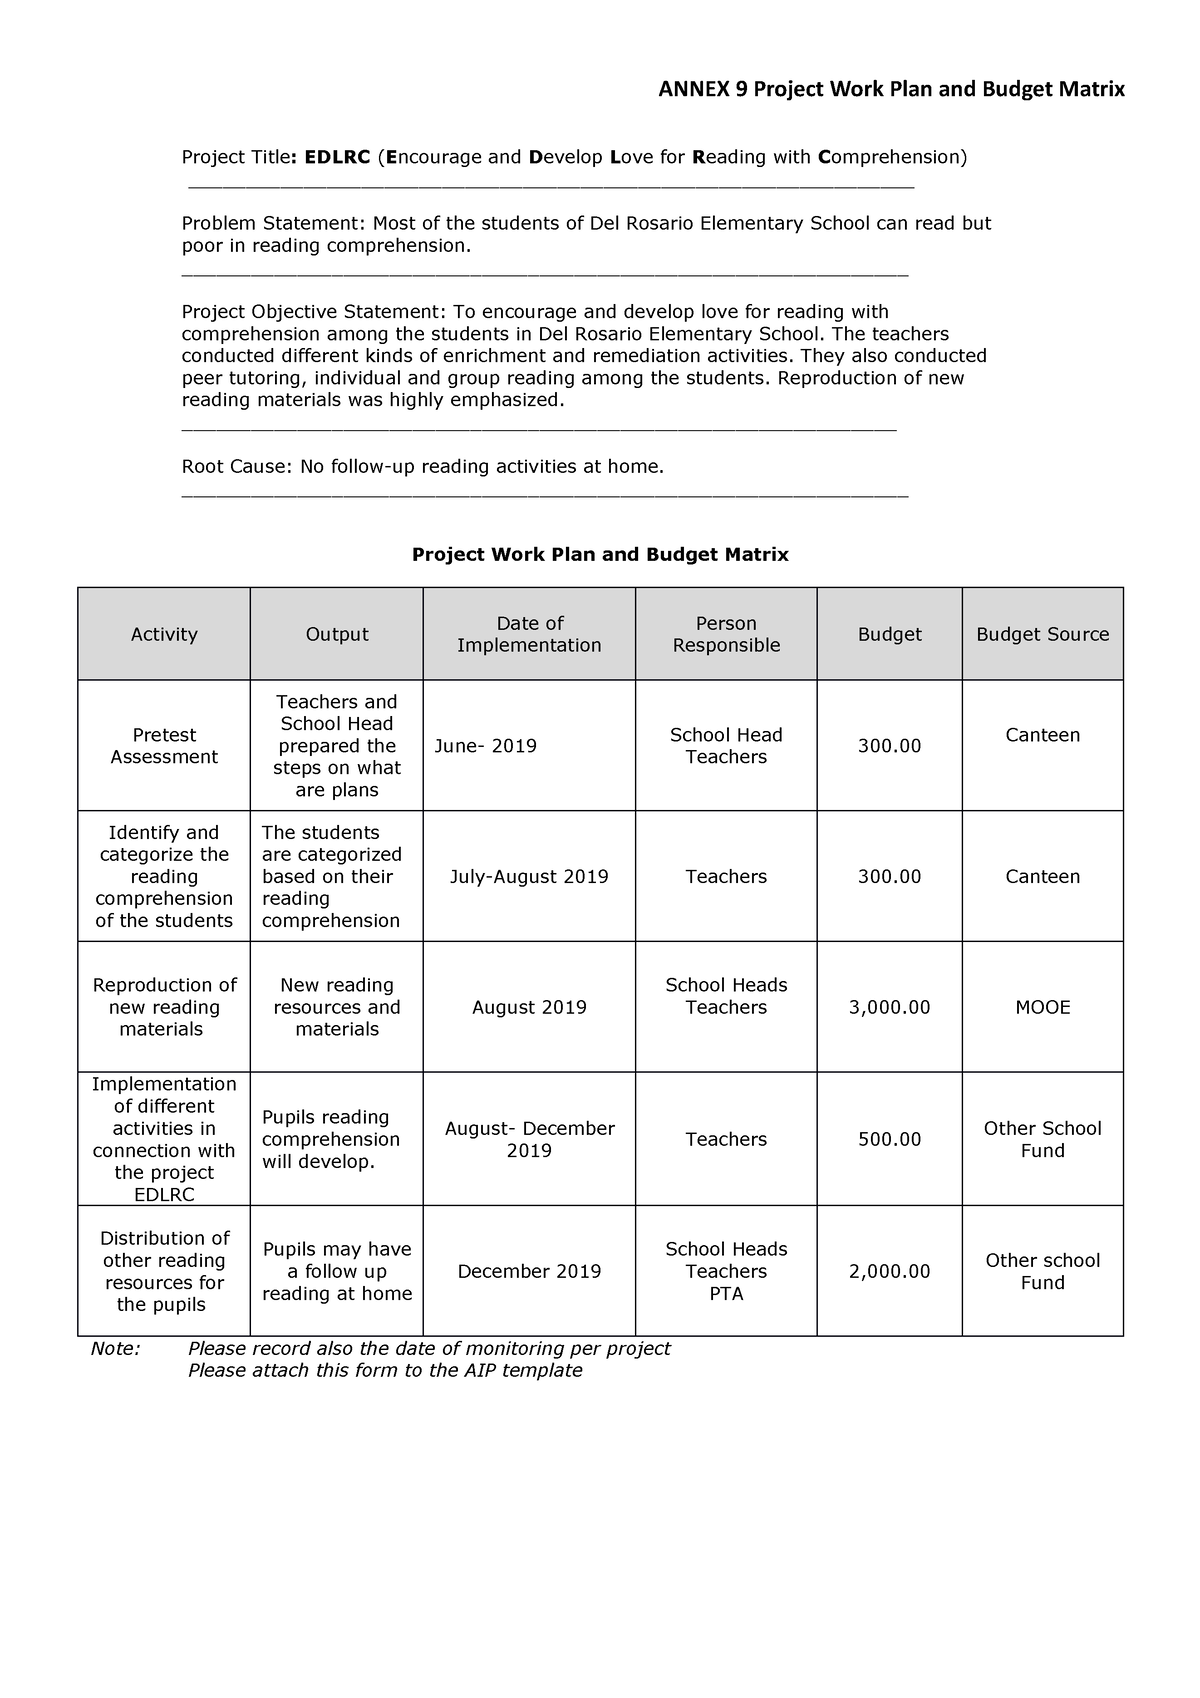 project work plan and budget matrix in research